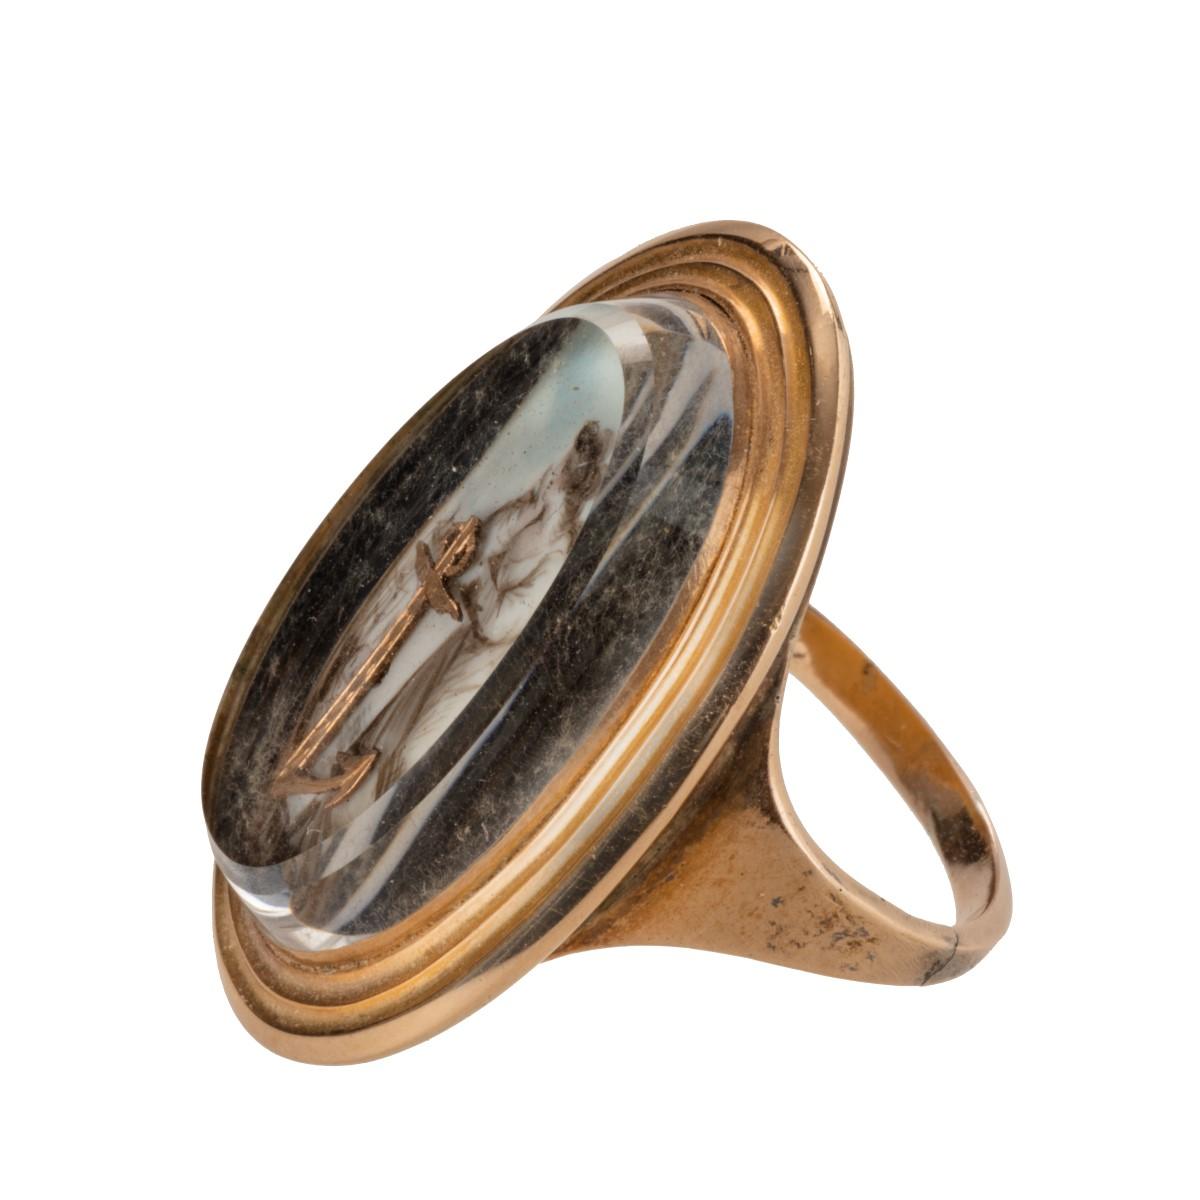 English George III Gold Ring Depicting ‘Hope’